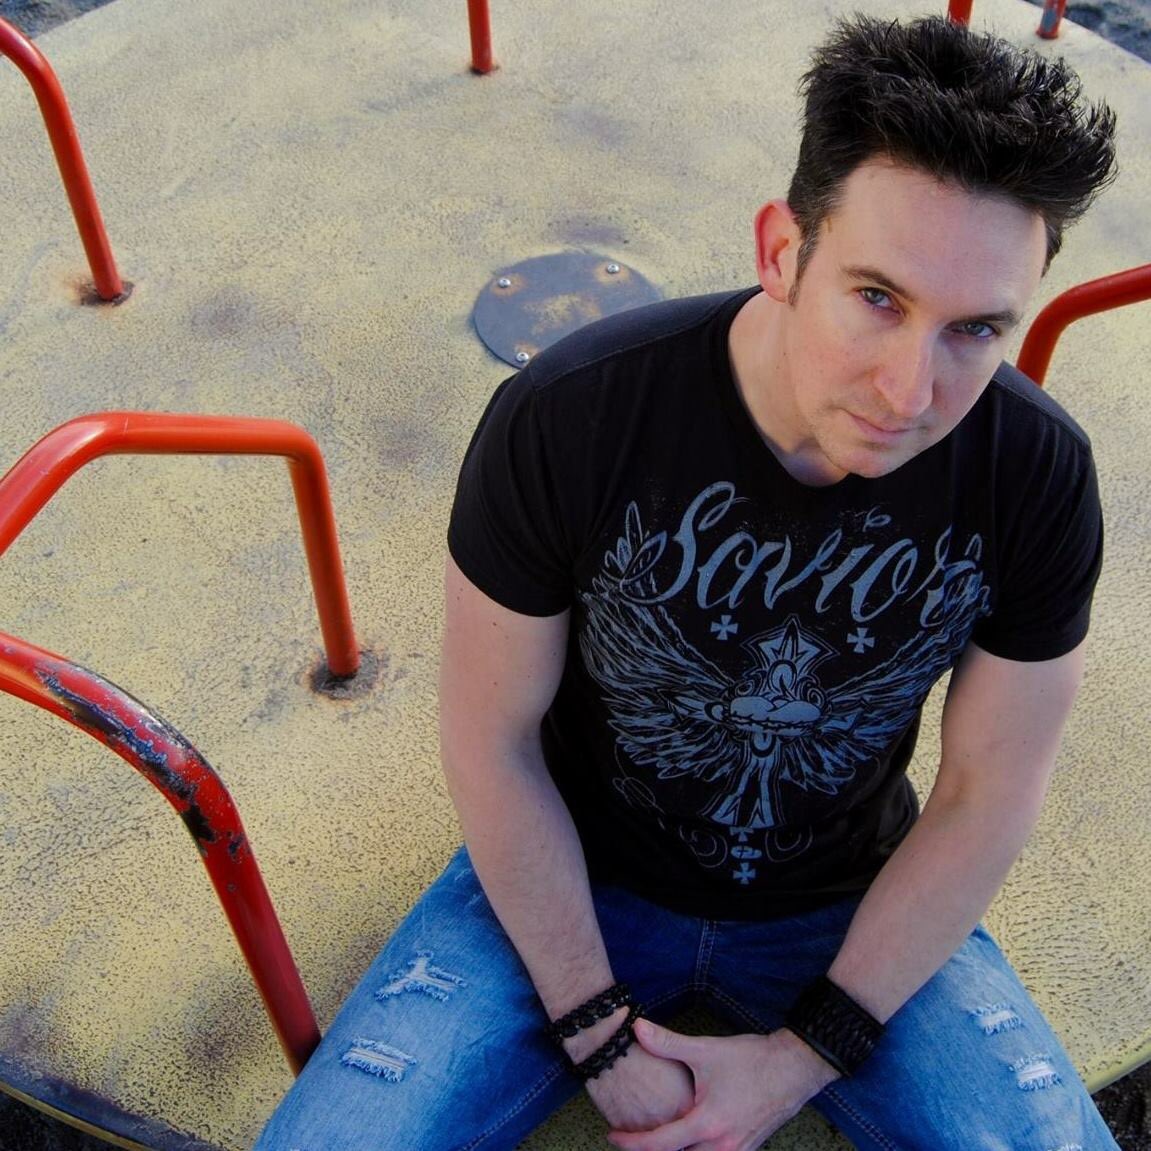 Look who is coming to #detroit 🙌 Details coming soon😱👻 @dustinpari @Donnie_wrdwknd @lyndsey_bannon @JeffAdkinsDPX #weirdweekends #September #paranormal #fun #Detroitstyle